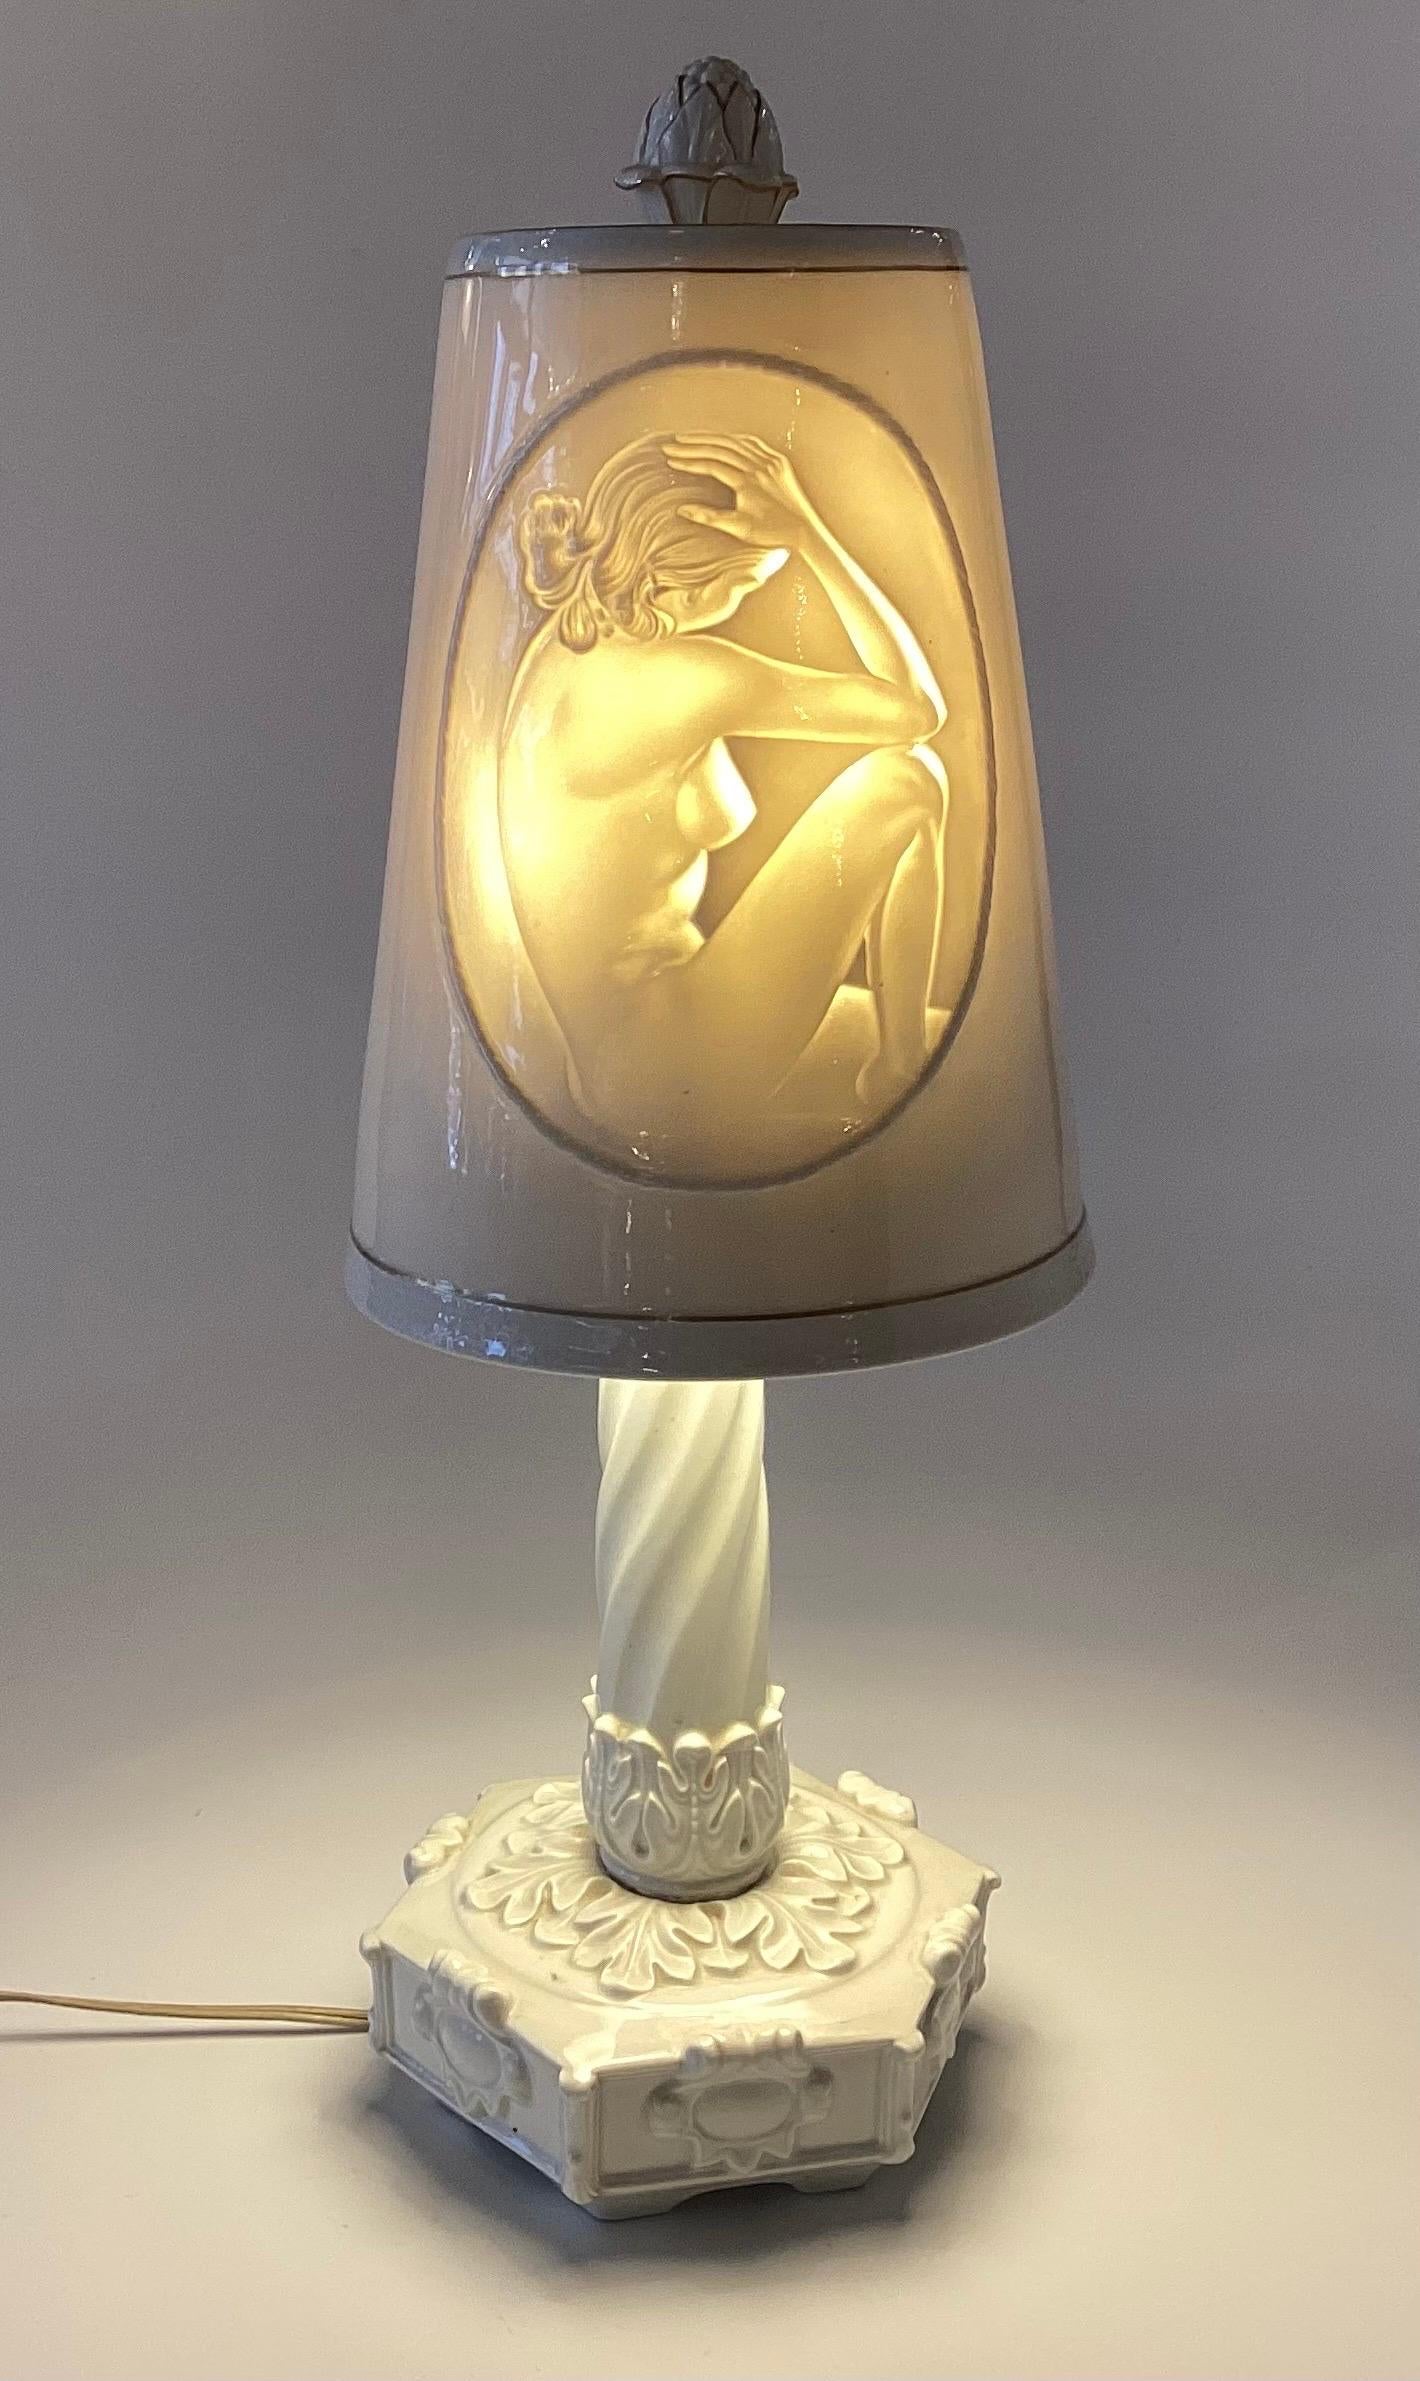 Elegant porcelain lithophane off white porcelain with a hidden figure of a female nude when turned on.